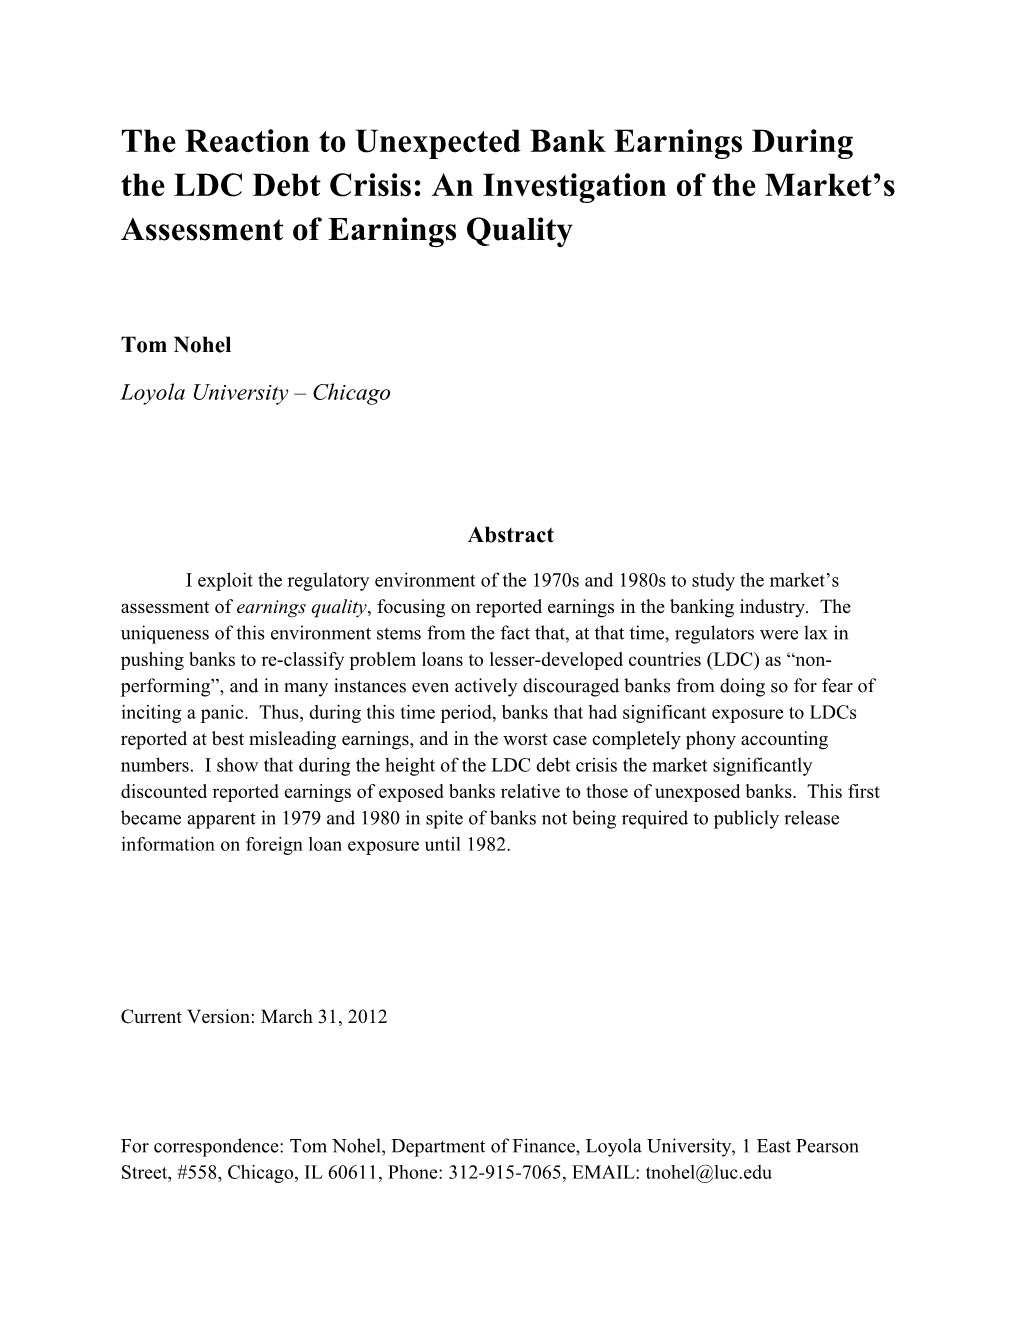 The Reaction to Unexpected Bank Earnings During the LDC Debt Crisis: an Investigation